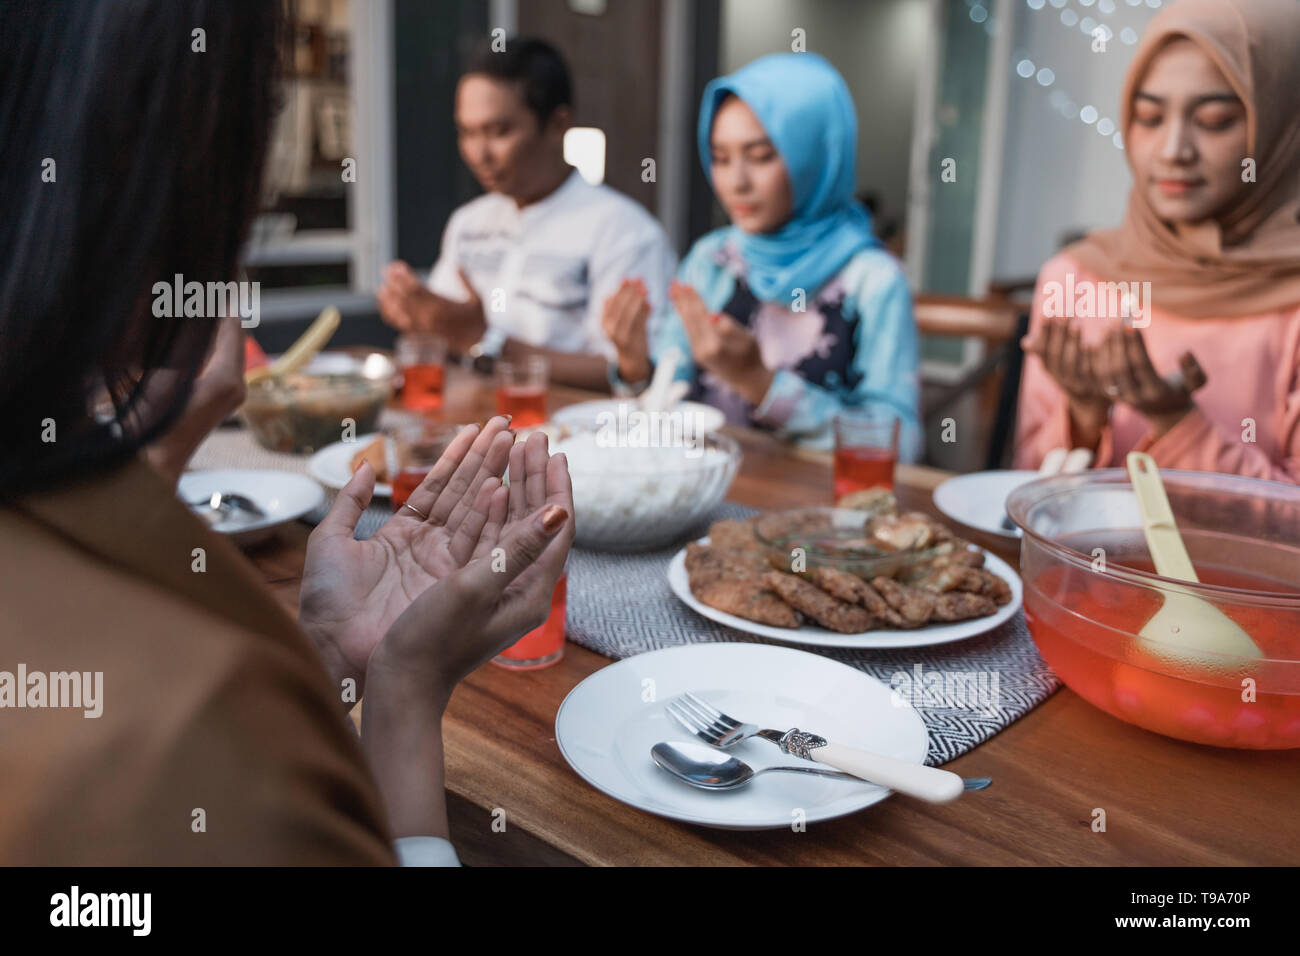 Hijab women and a man pray together before meals, a fast breaking meal served on a table in backyard Stock Photo